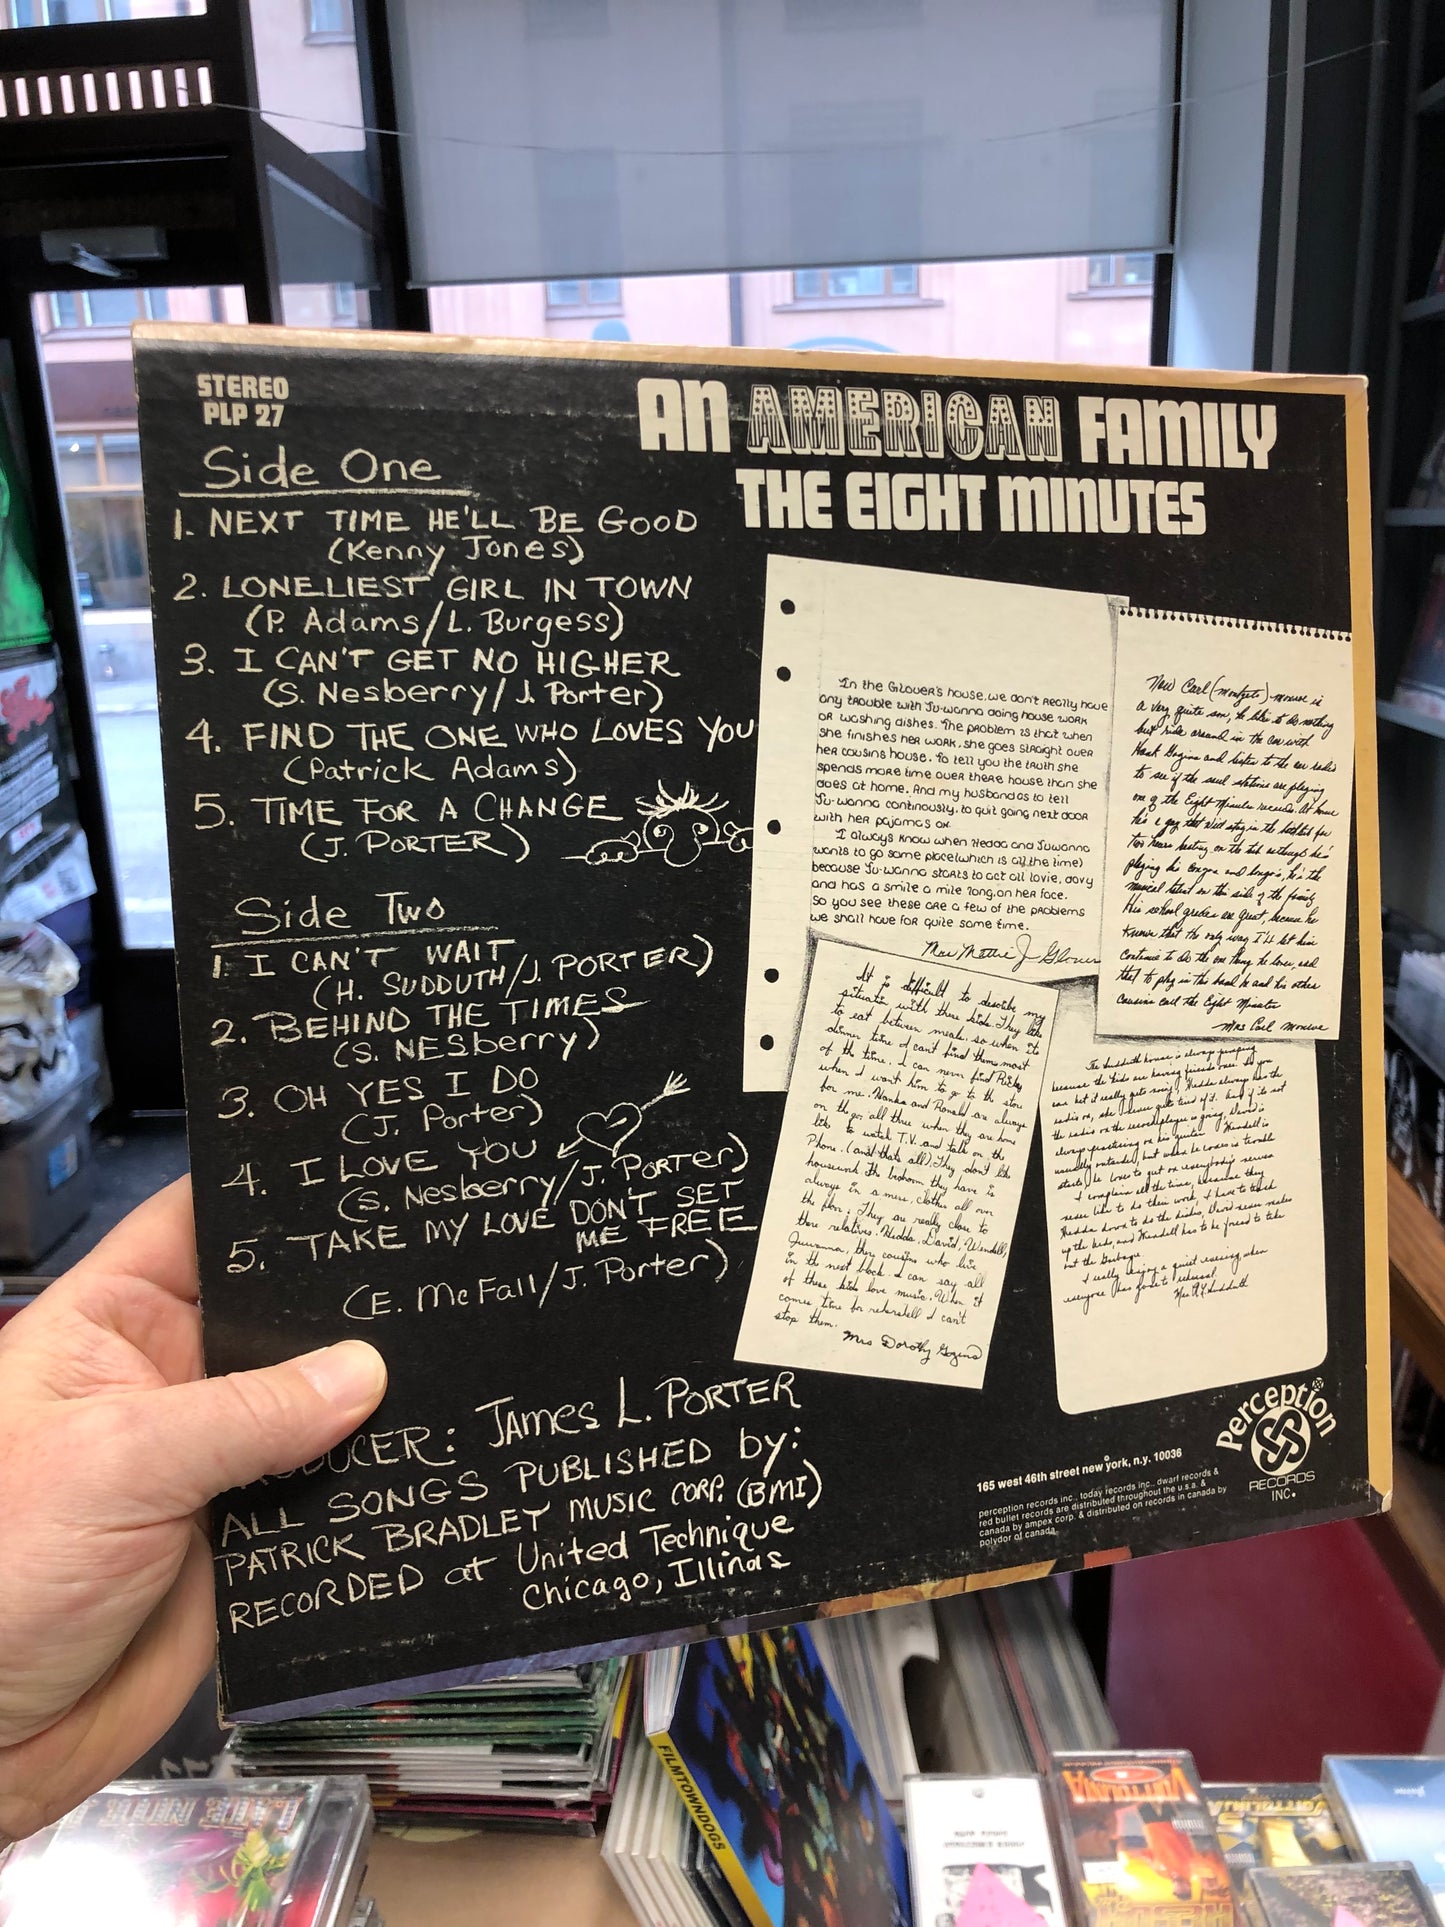 The Eight Minutes: An American Family, 1st pressing, US 1972, Perception Records.